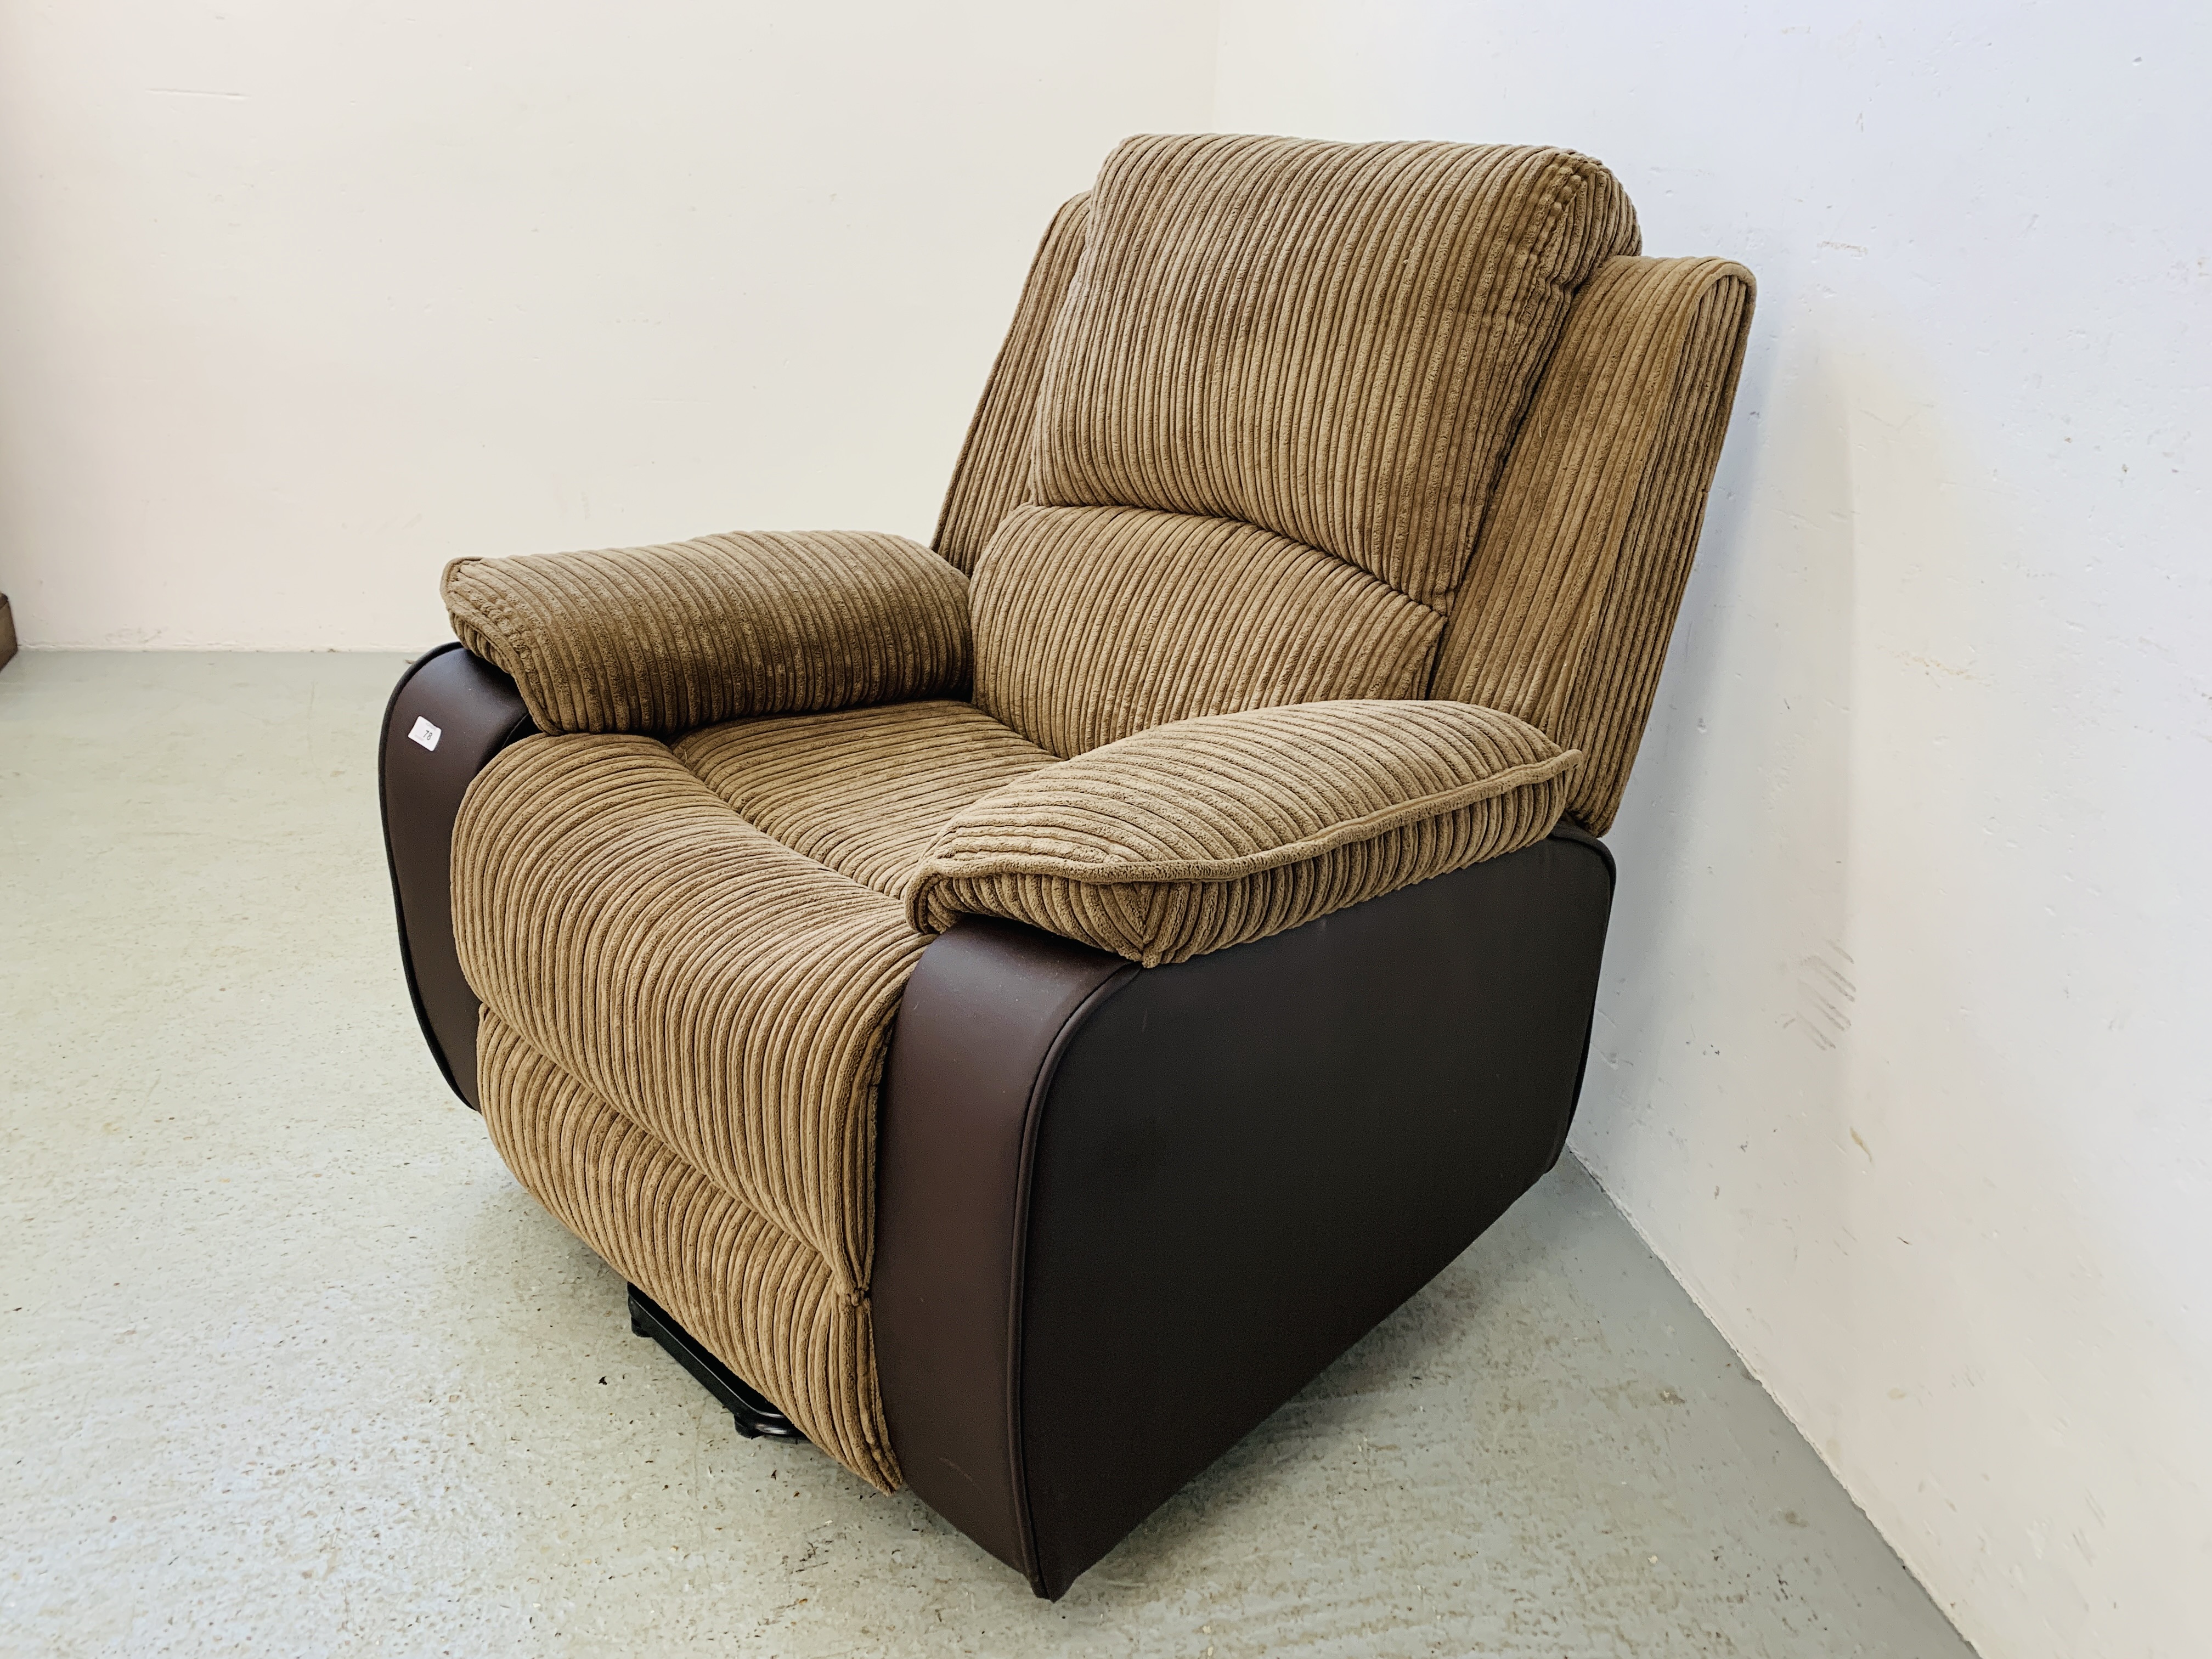 A MODERN ELECTRIC RECLINING EASY CHAIR WITH BROWN FAUX LEATHER AND BROWN CORDED UPHOLSTERY - SOLD - Image 3 of 6